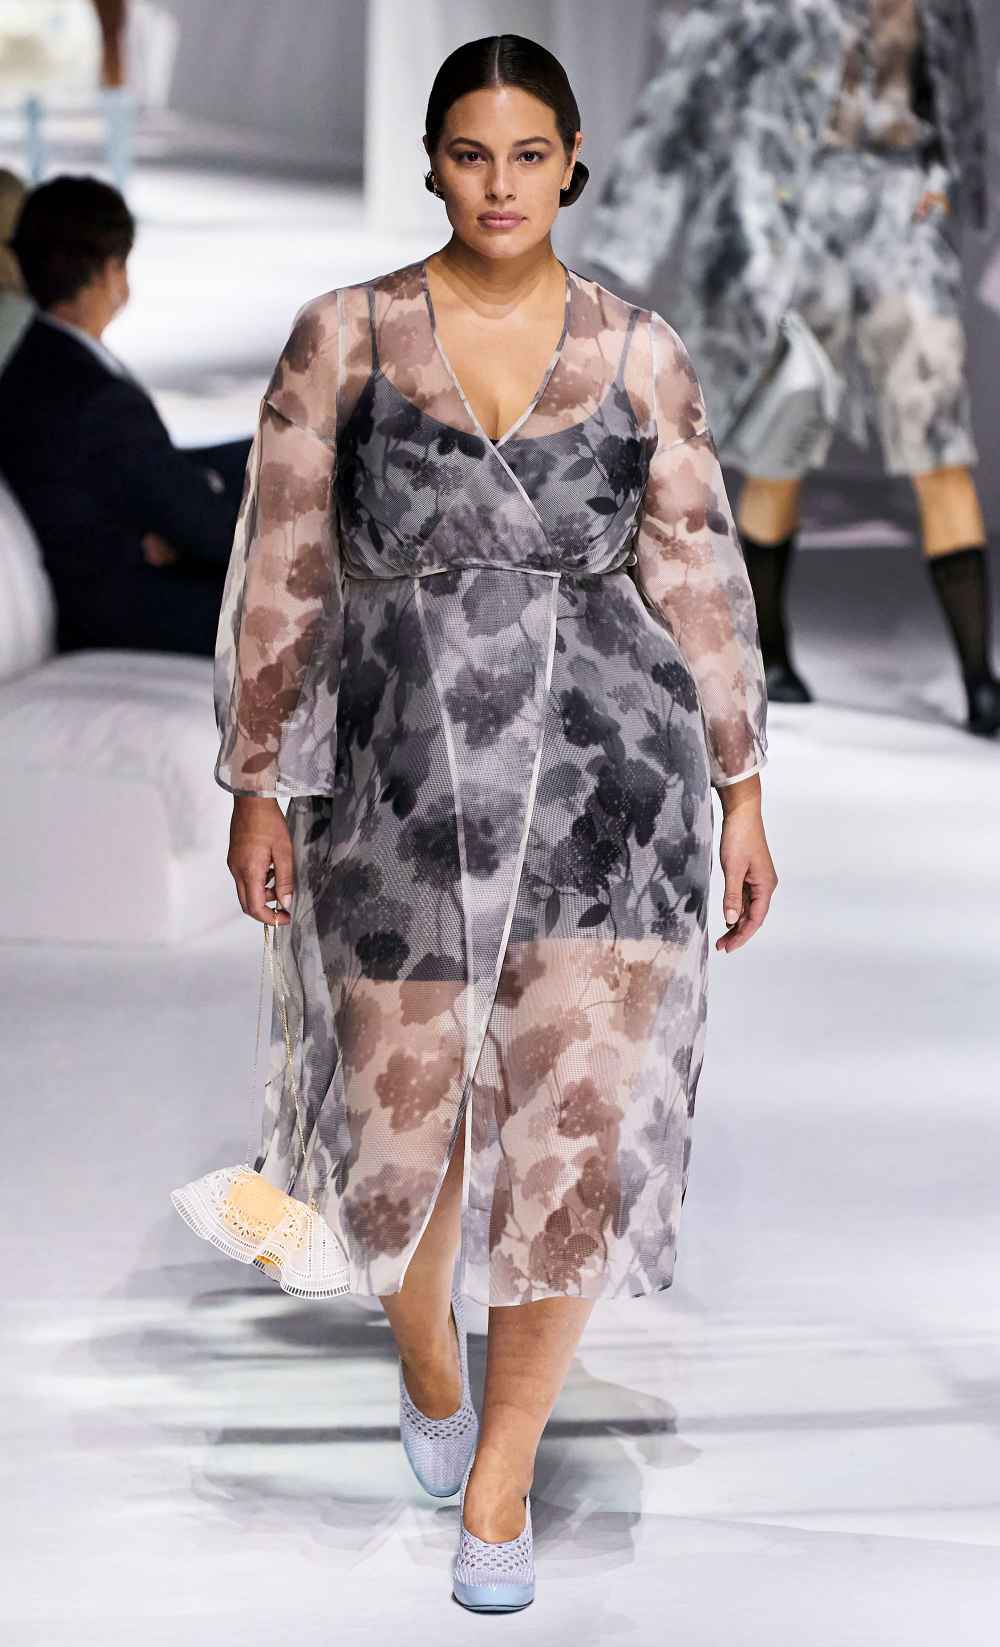 Ashley Graham leads a cast of full-figured models at New York Fashion Week